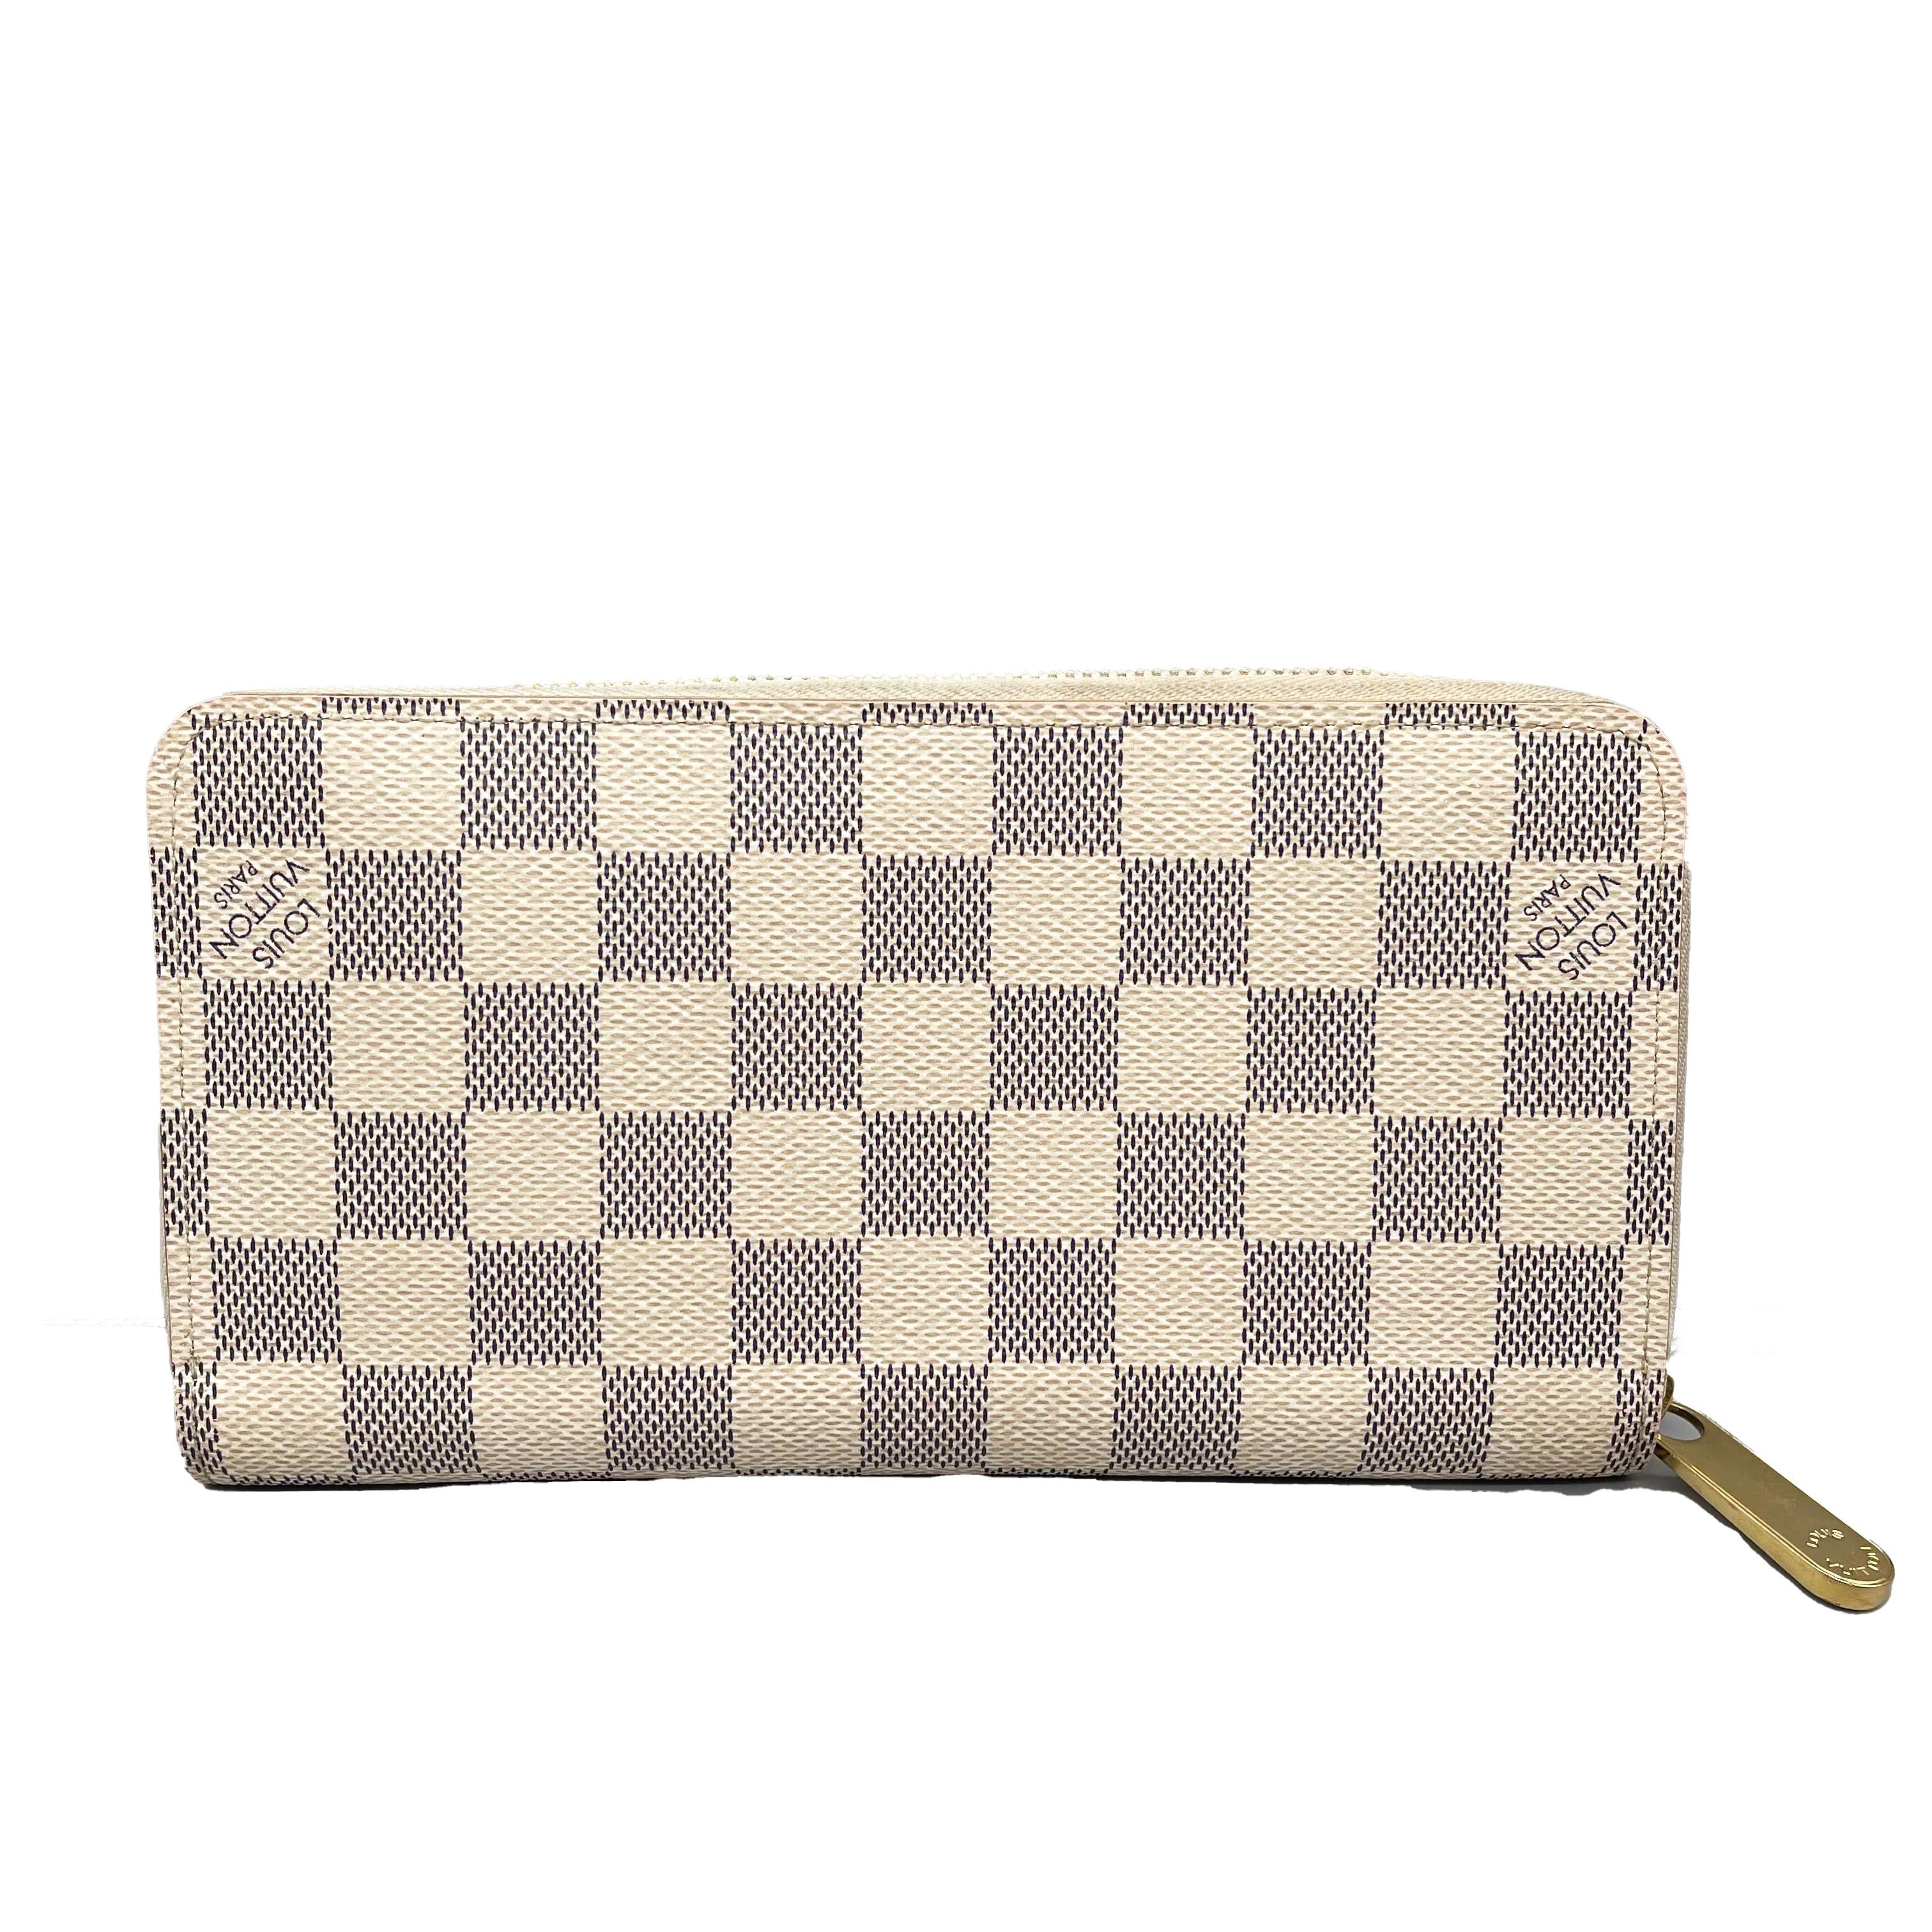 LV Louis Vuitton - Zippy Wallet - Canvas / Leather - Damier Azur / Gold

Description

Damier Azur coated canvas gives a fresh look to Louis Vuitton's iconic Zippy wallet, which is famous for its secure, zip-around format.
Grained cowhide-leather